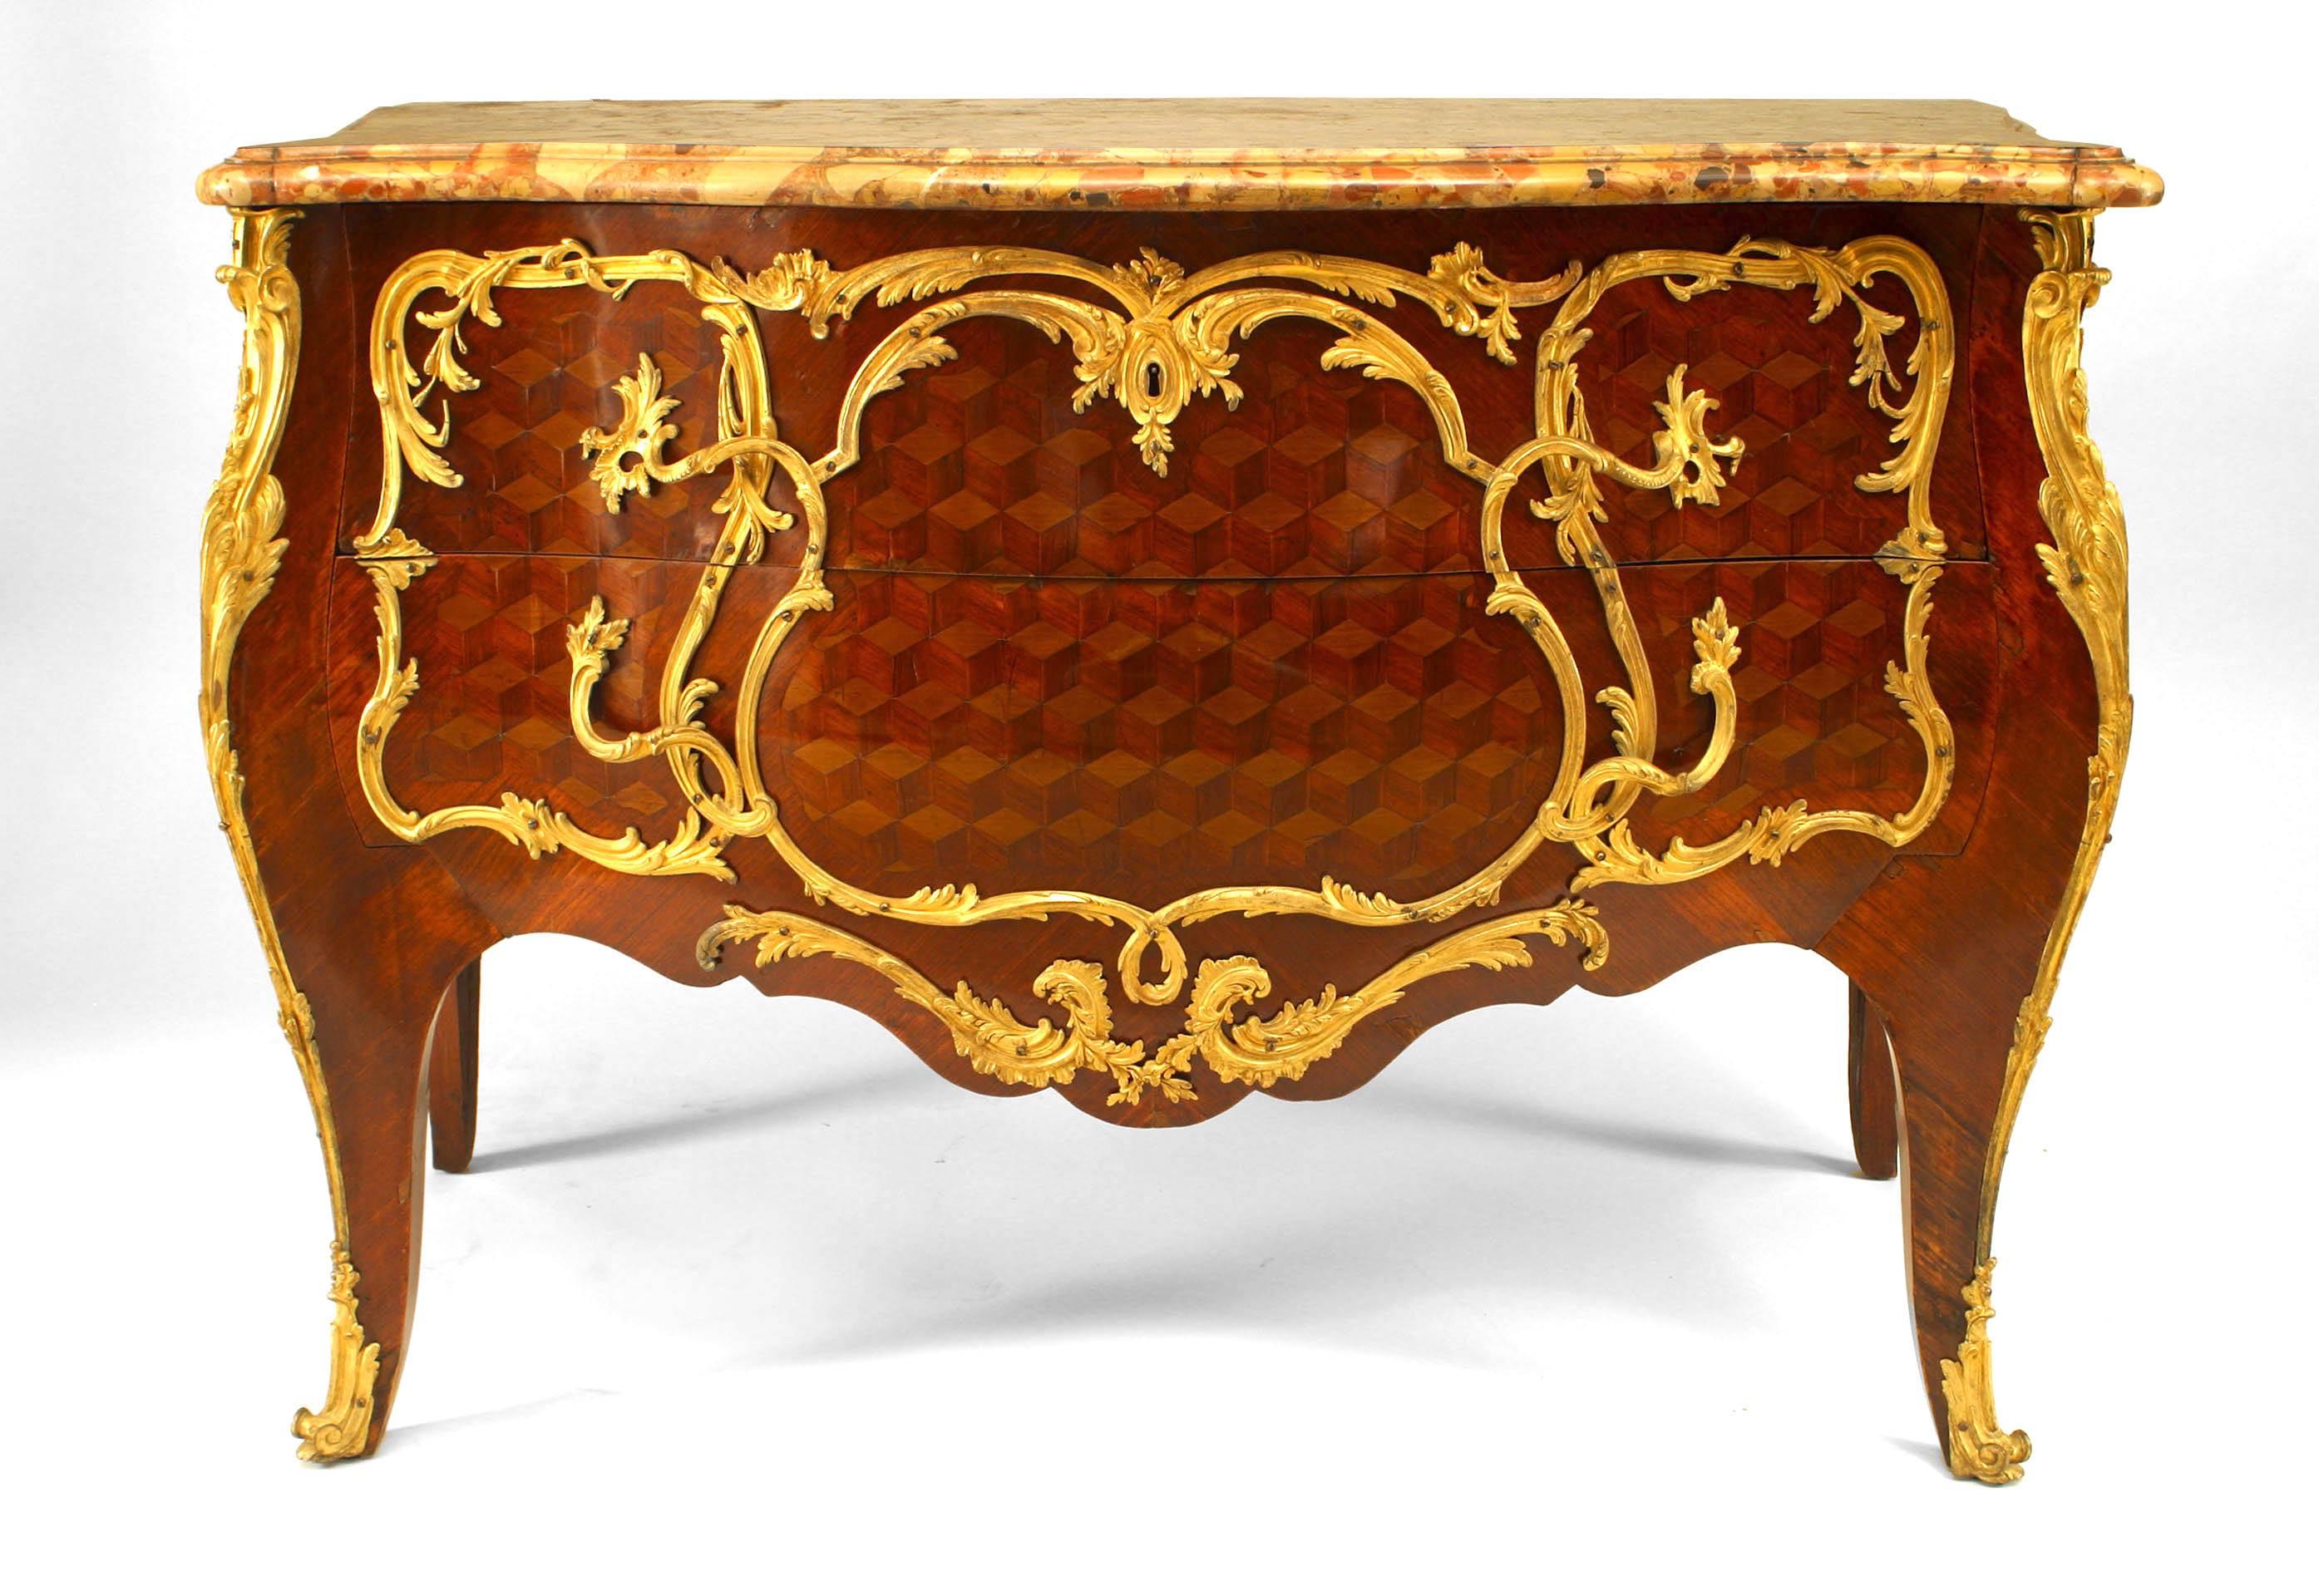 French Louis XV style (19th Century) inlaid parquetry 2 drawer commode with bronze trim and shaped marble top.
